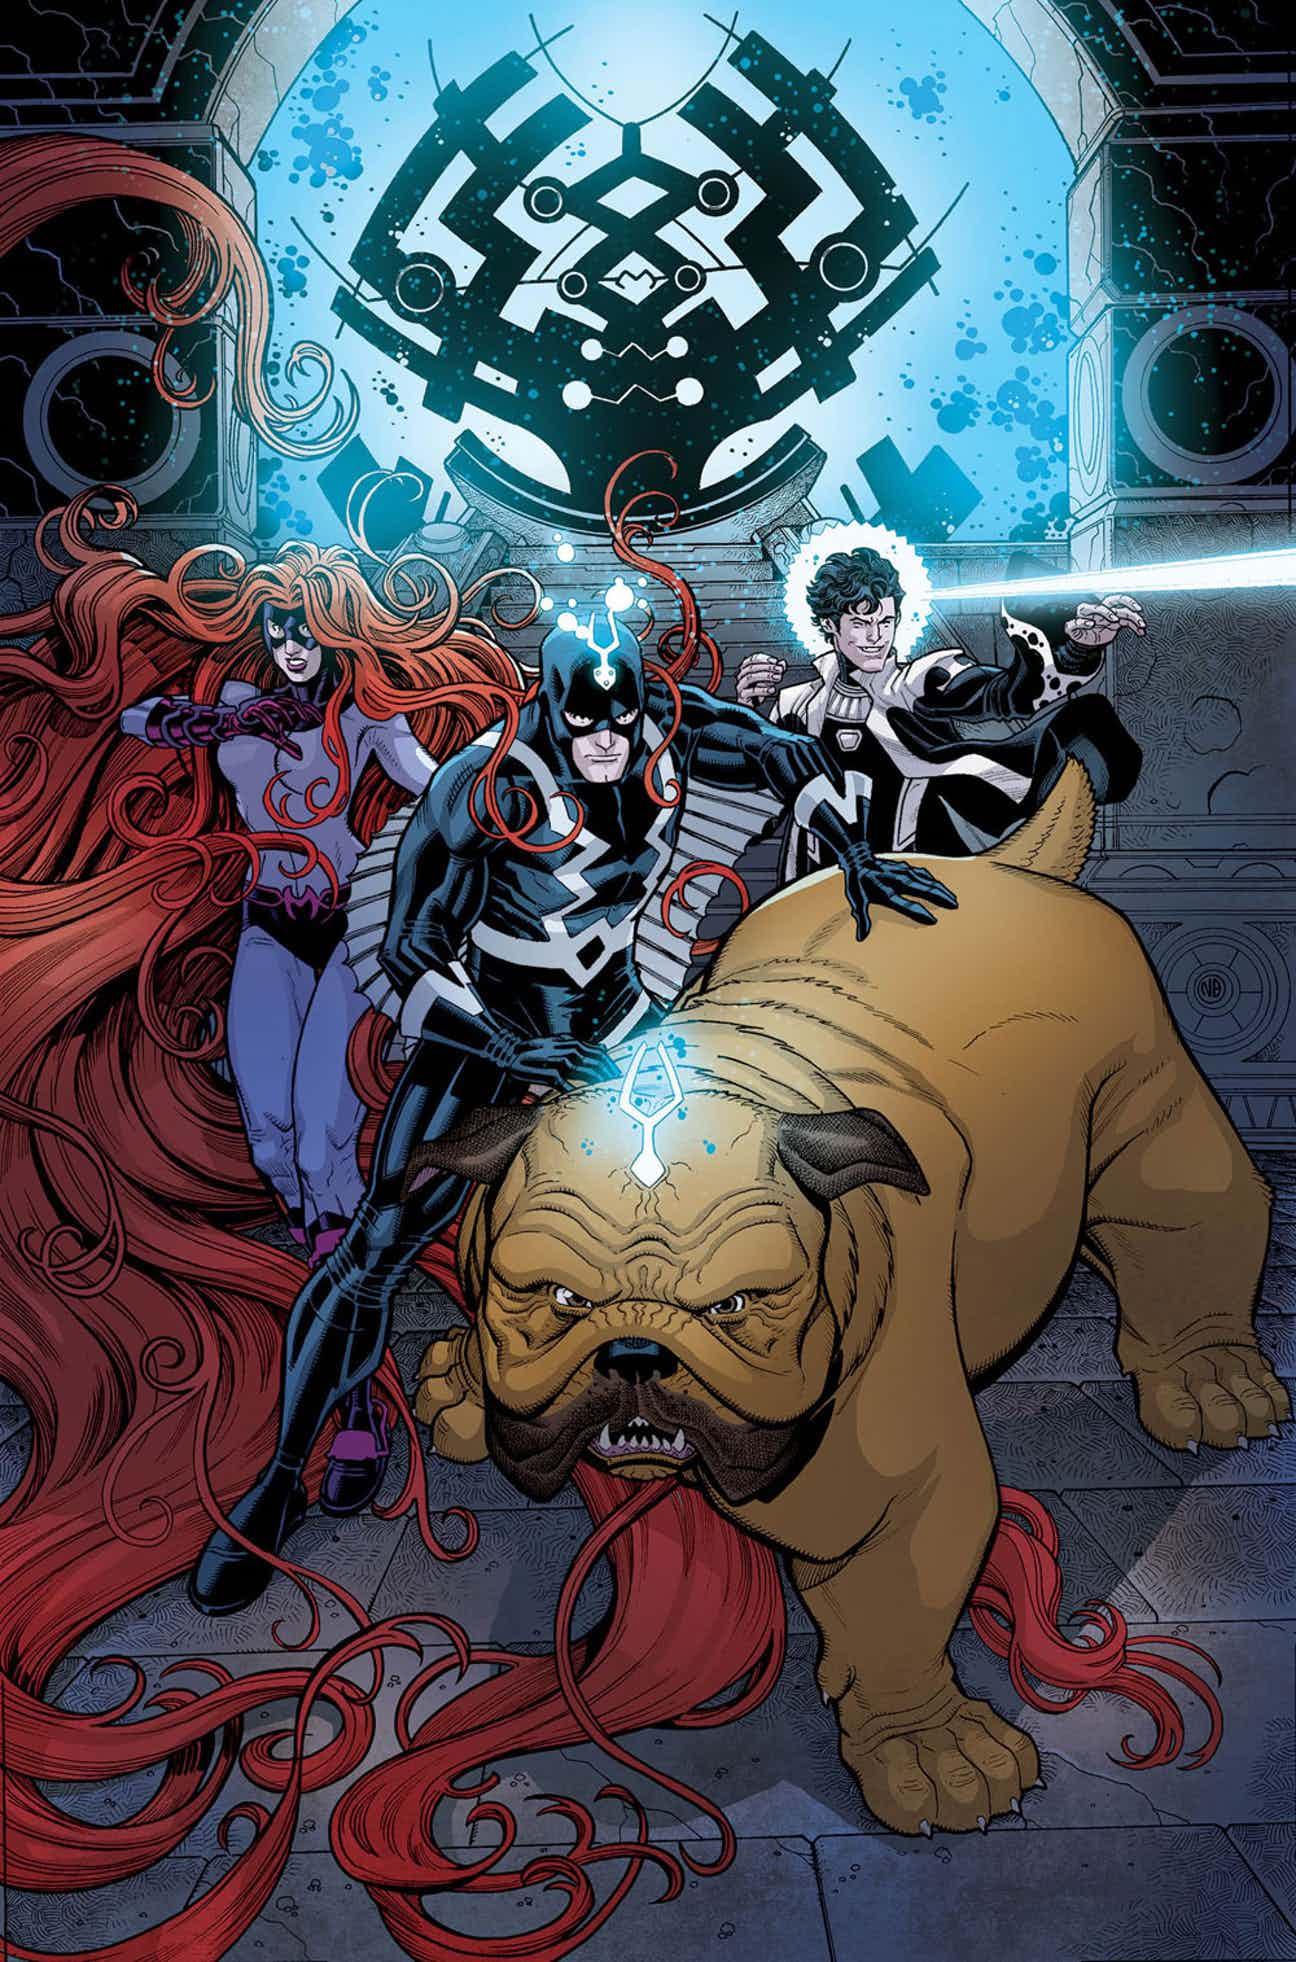 Inhumans: Once and Future Kings Vol. 1 #1